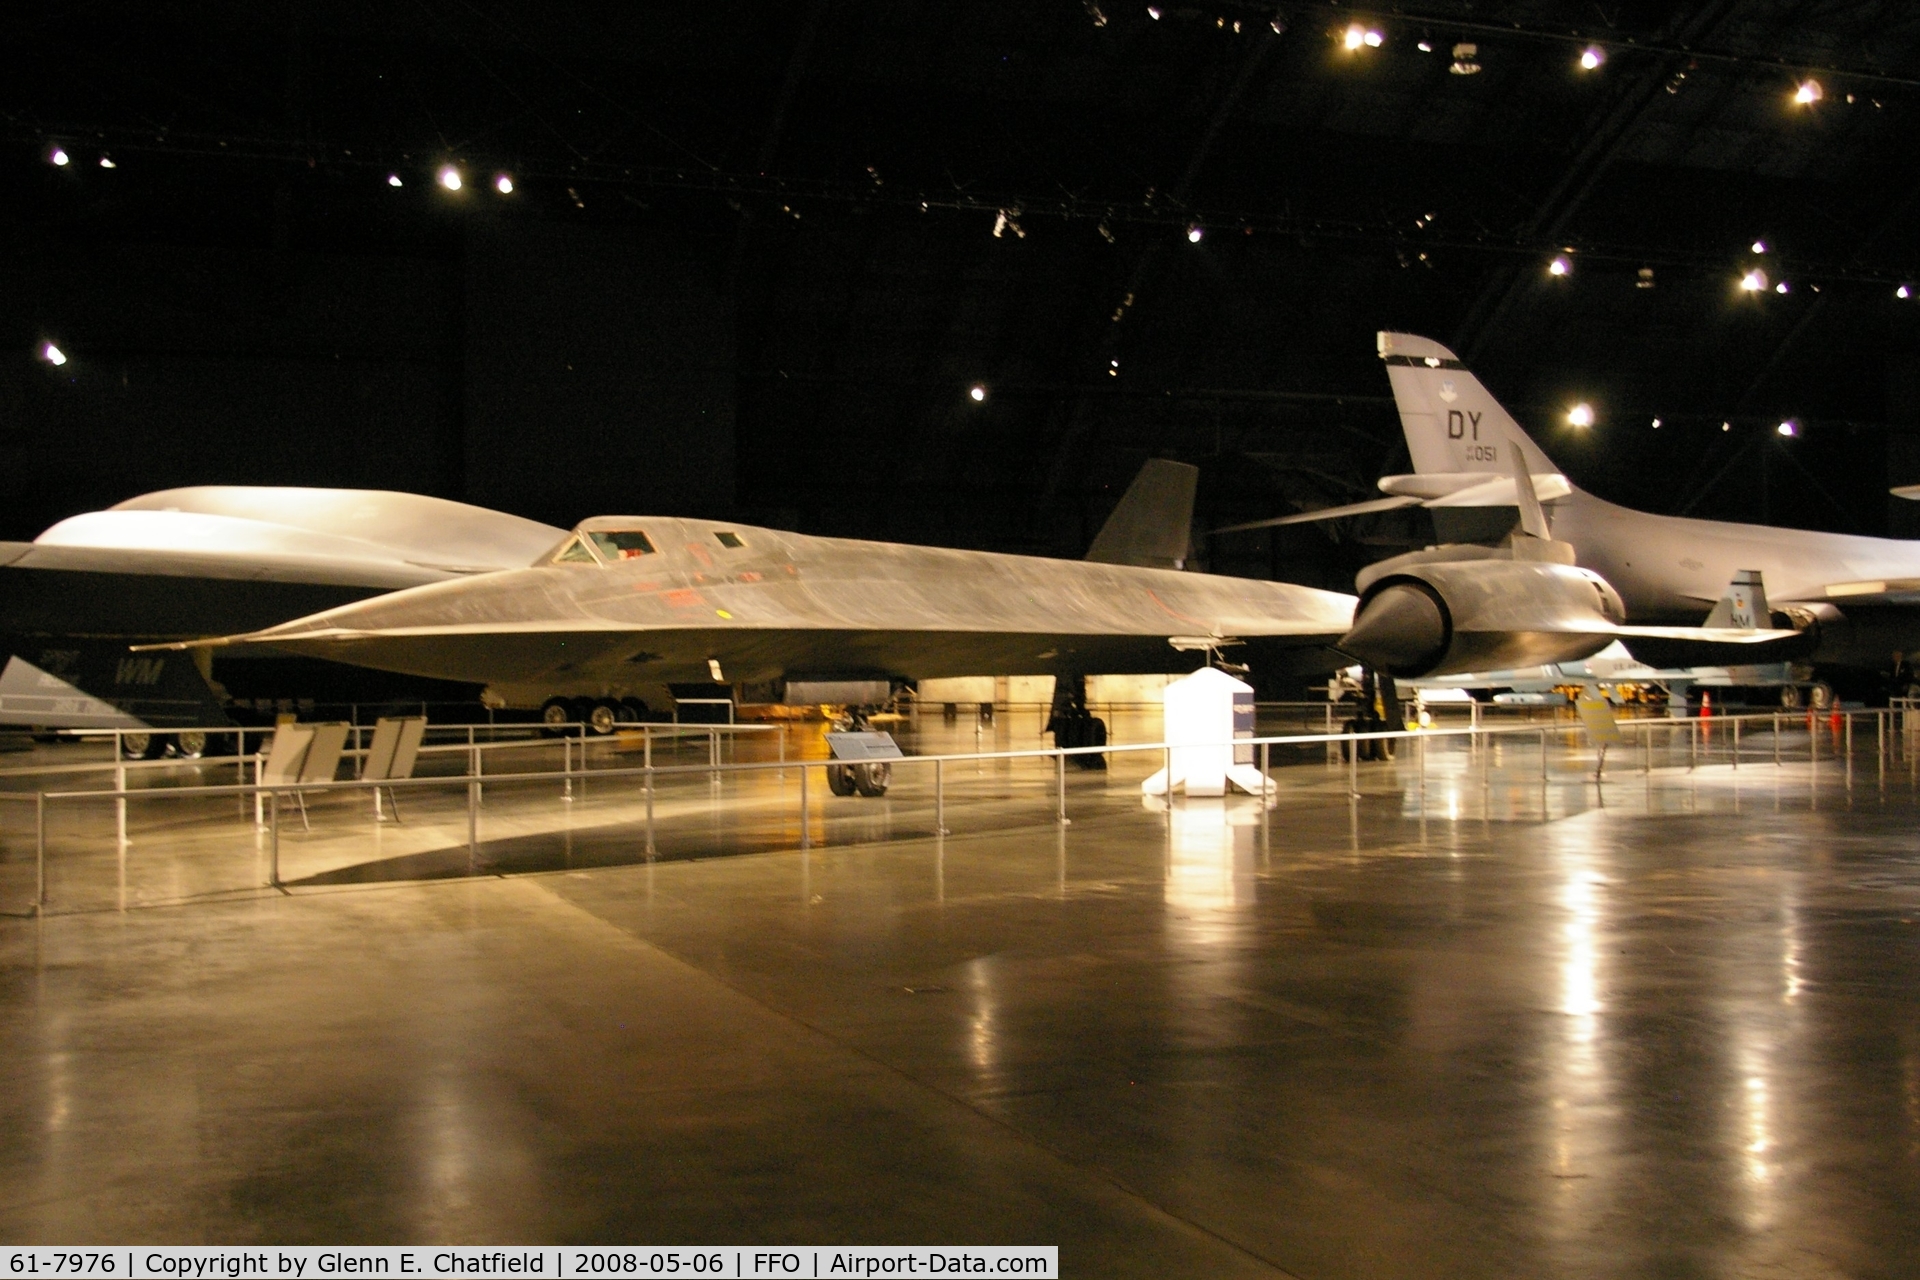 61-7976, 1961 Lockheed SR-71A Blackbird C/N 2027, At the National Museum of the U.S. Air Force